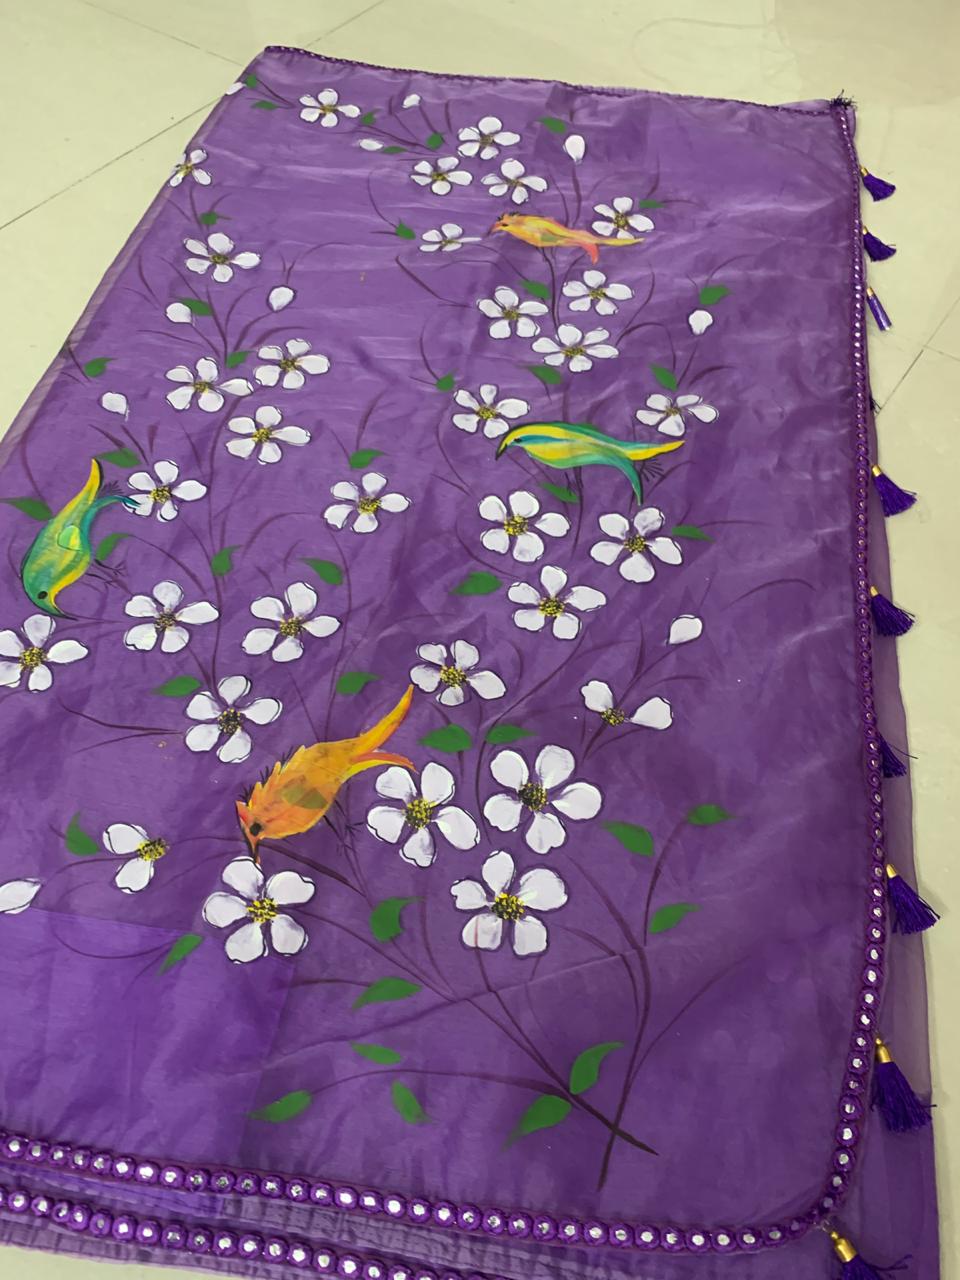 Organza Hand-Painted Saree with Birds & Flowers - Purple